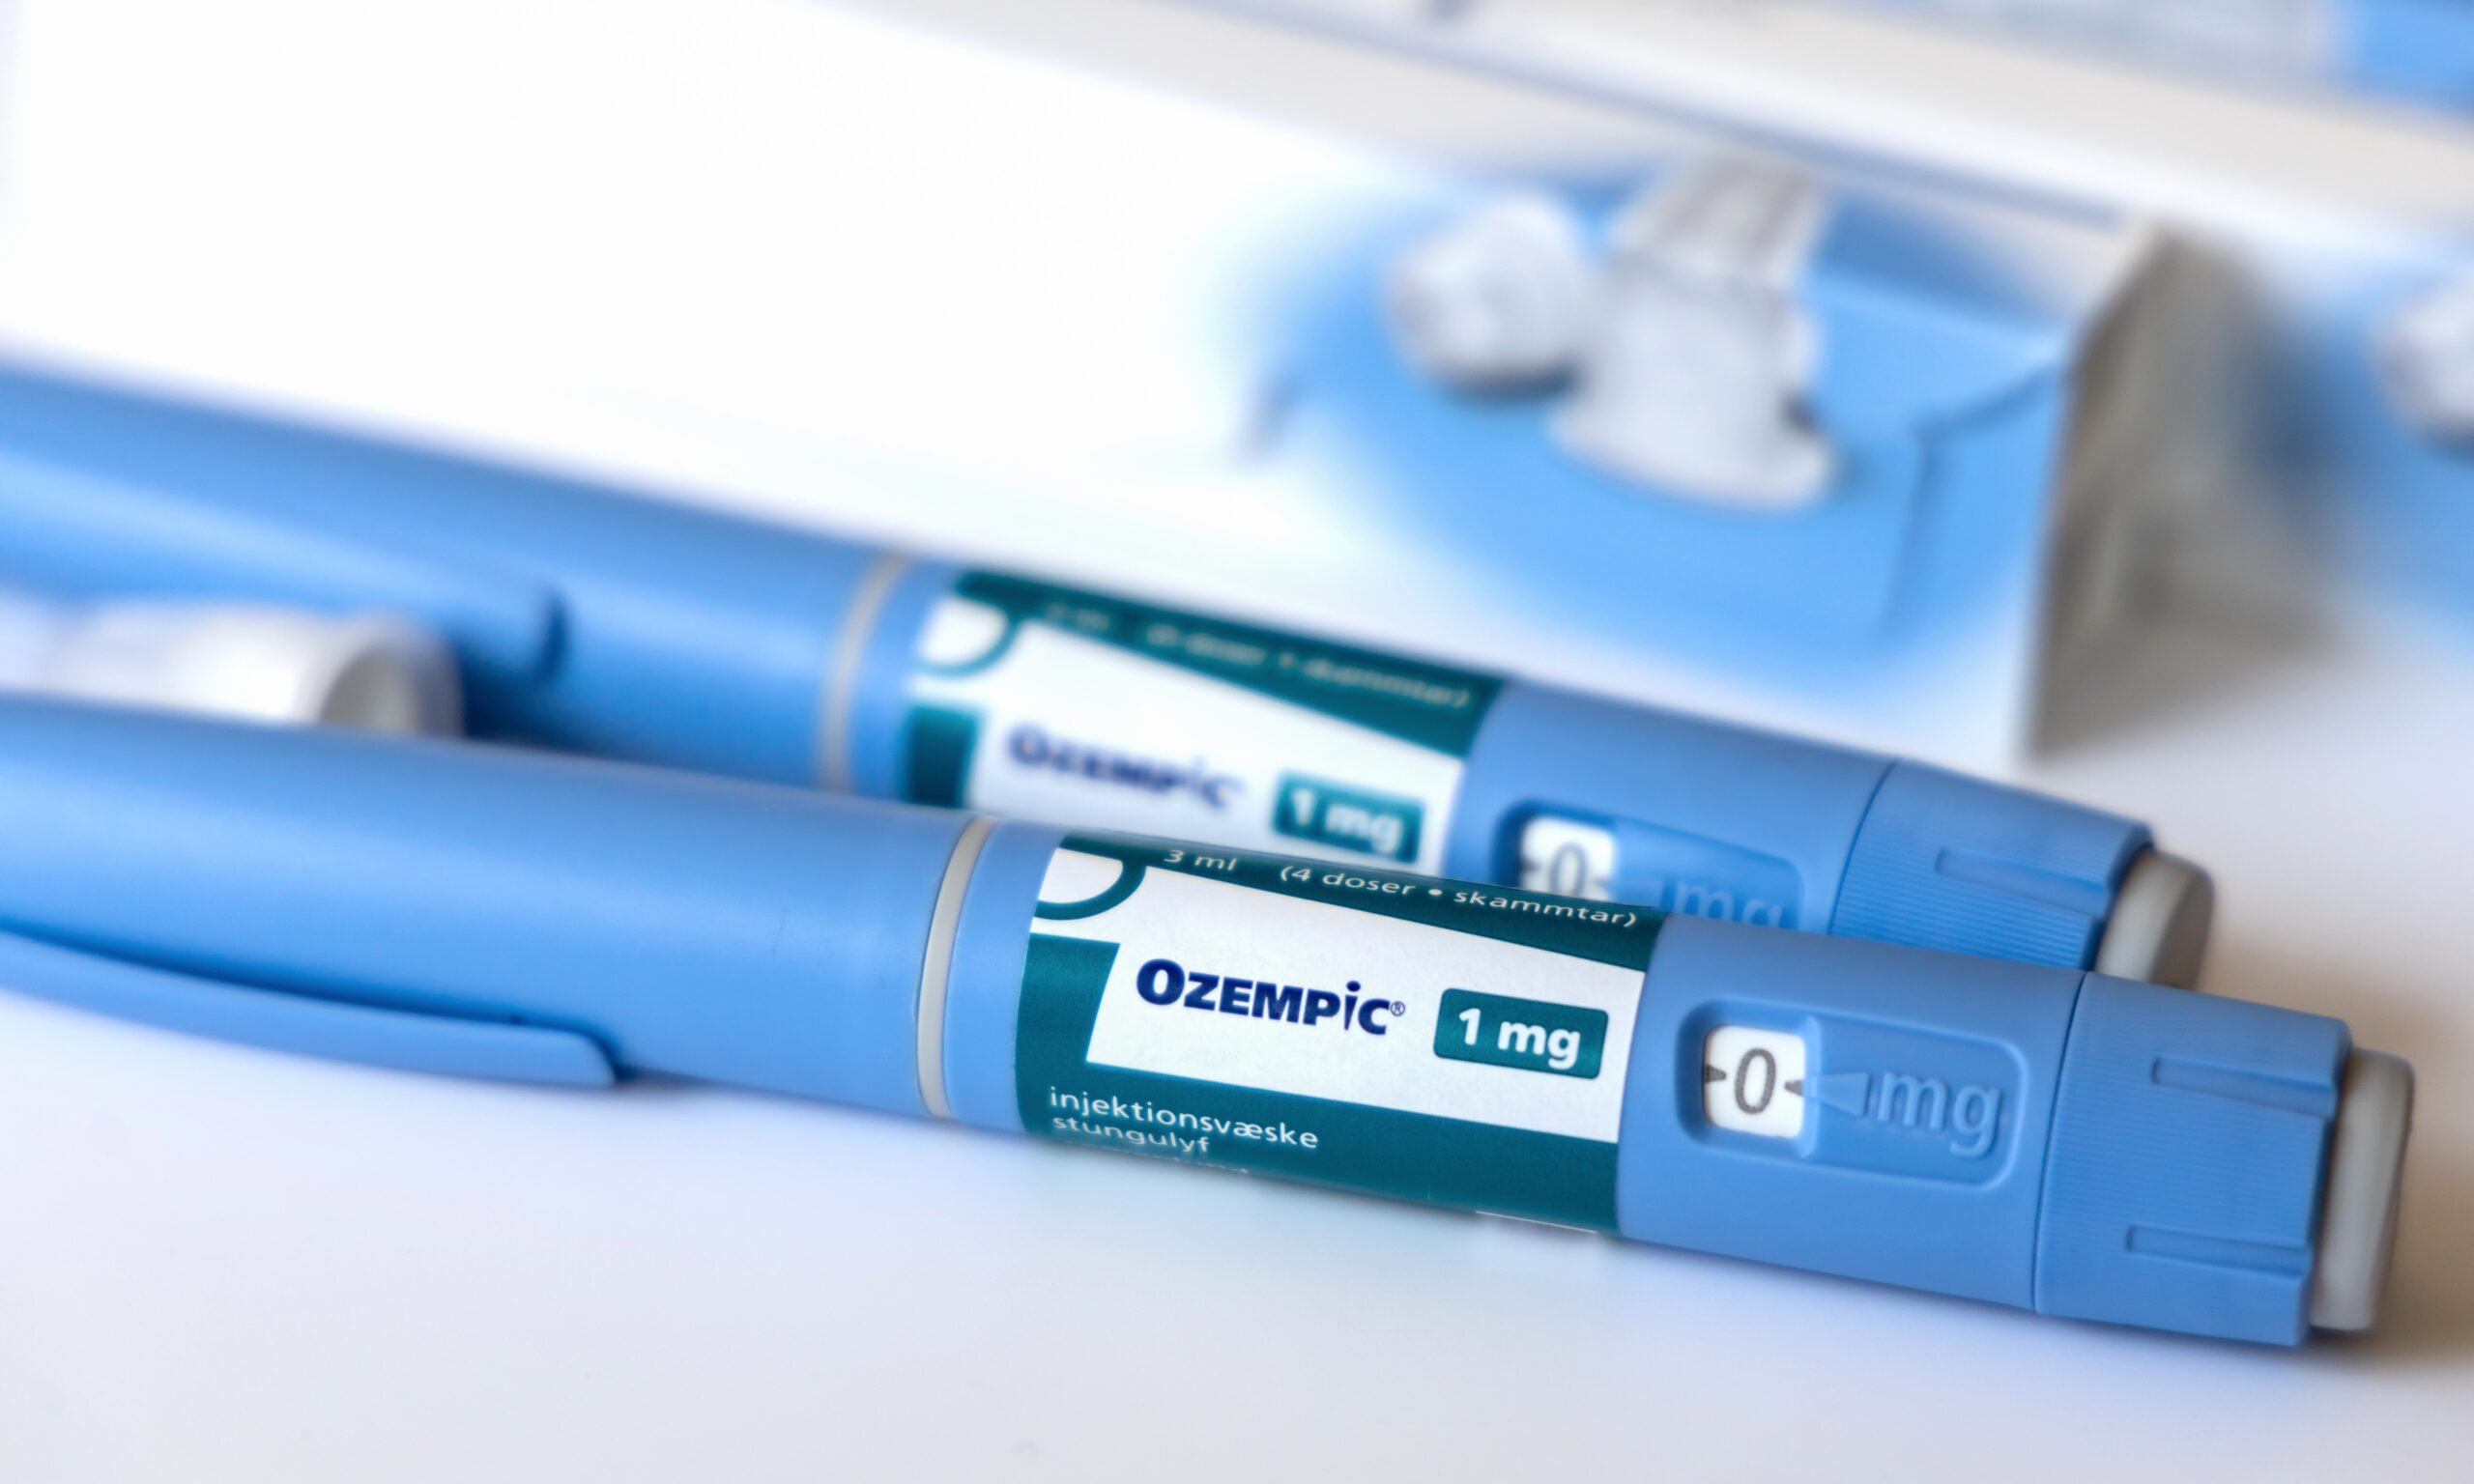 A close up photo of two blue Ozempic pens with boxes in the background (blurred out).